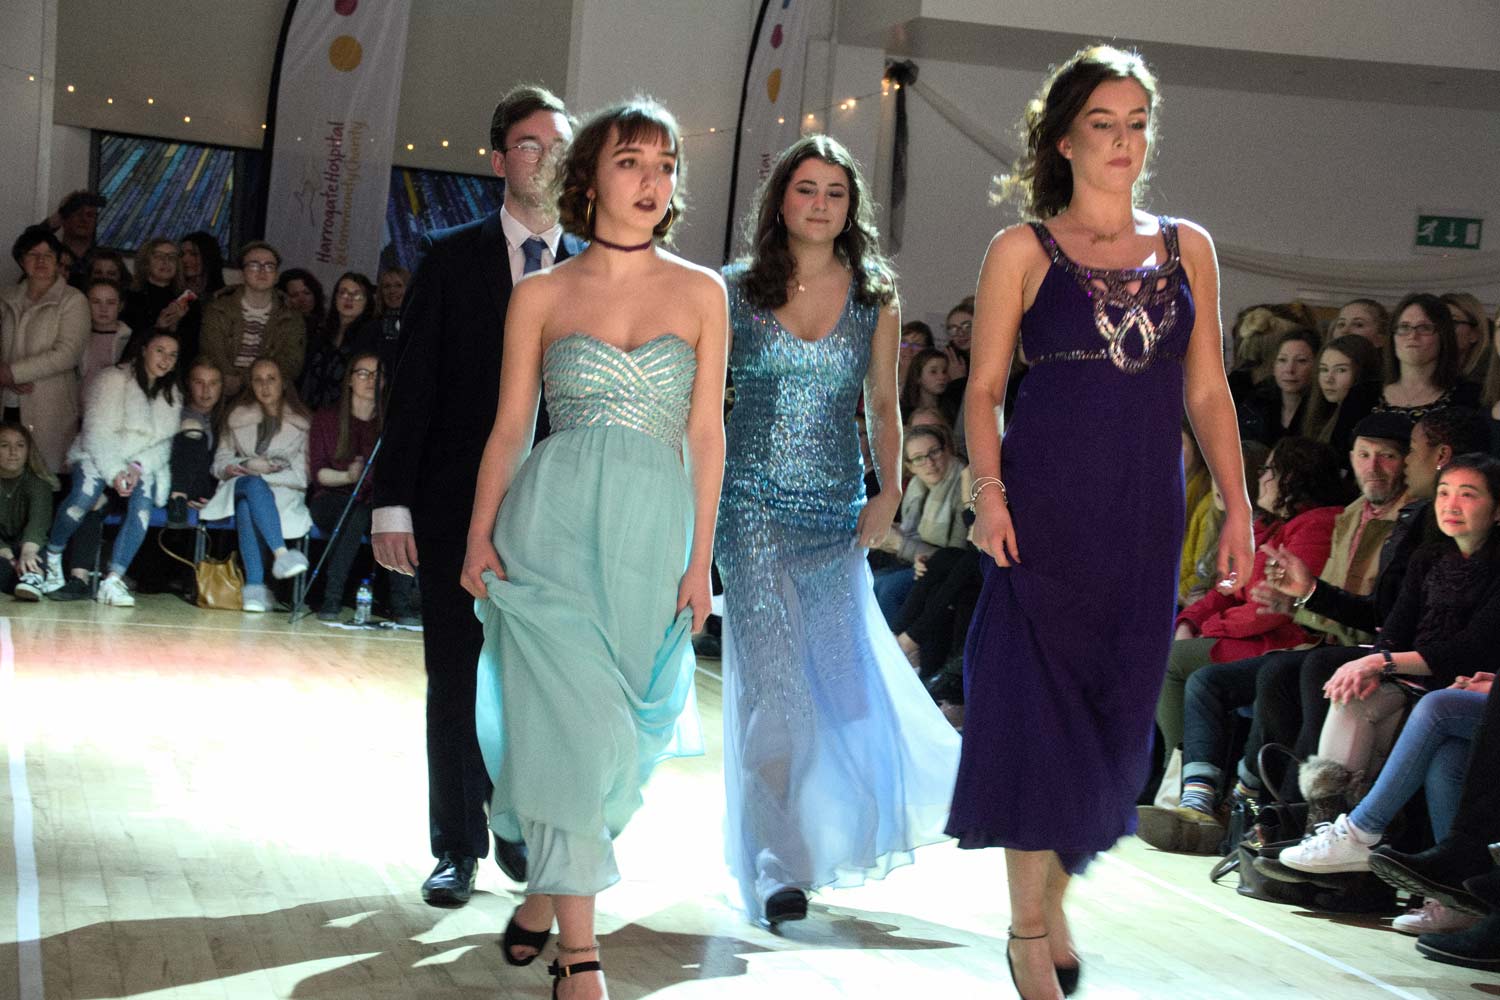 PreLoved Prom and Partywear Event raises £12,400 for charity